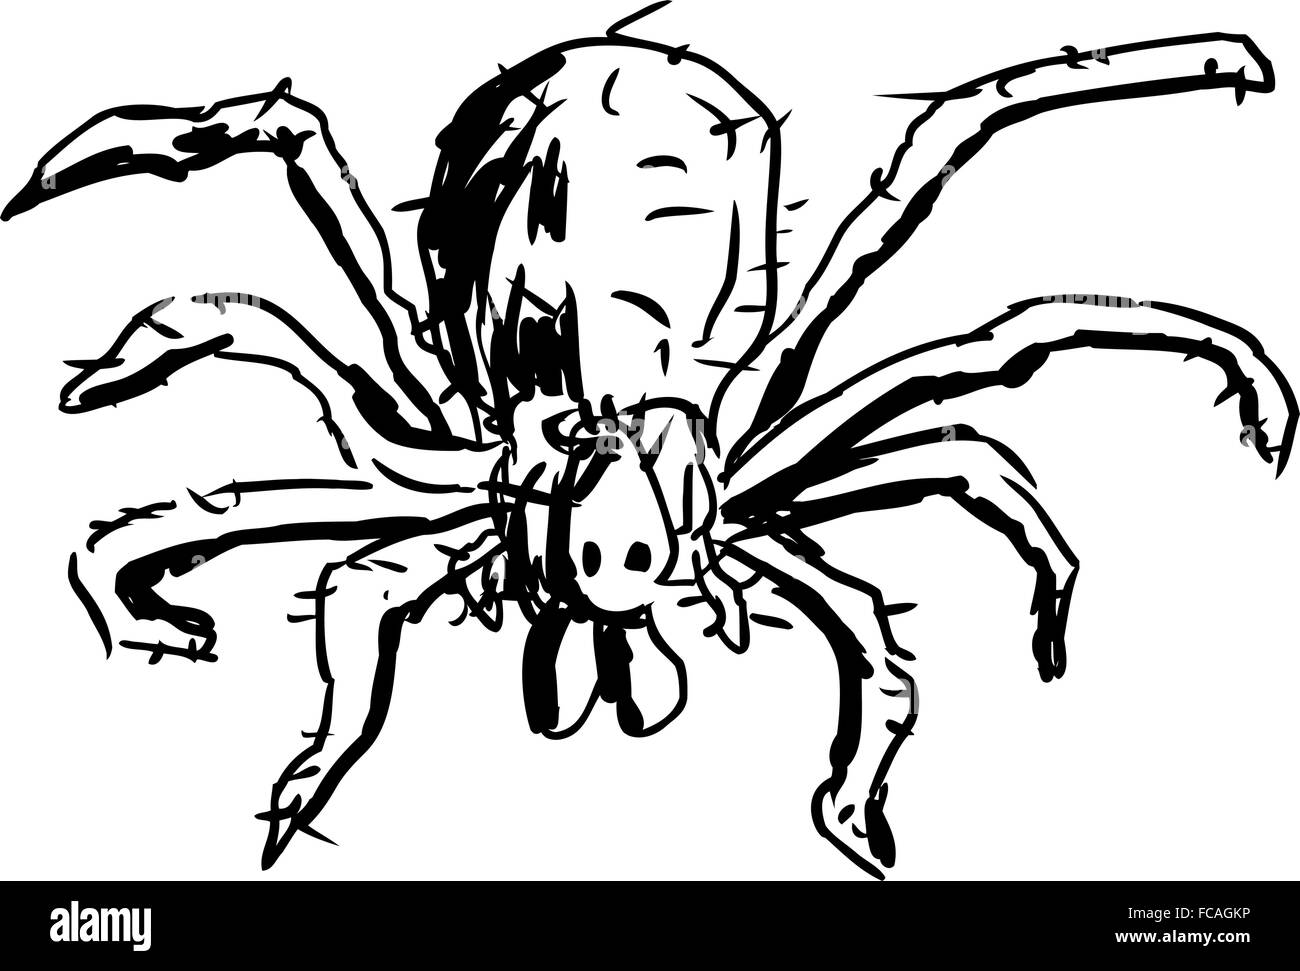 Close up top down view of outlined hobo spider over white background Stock Vector